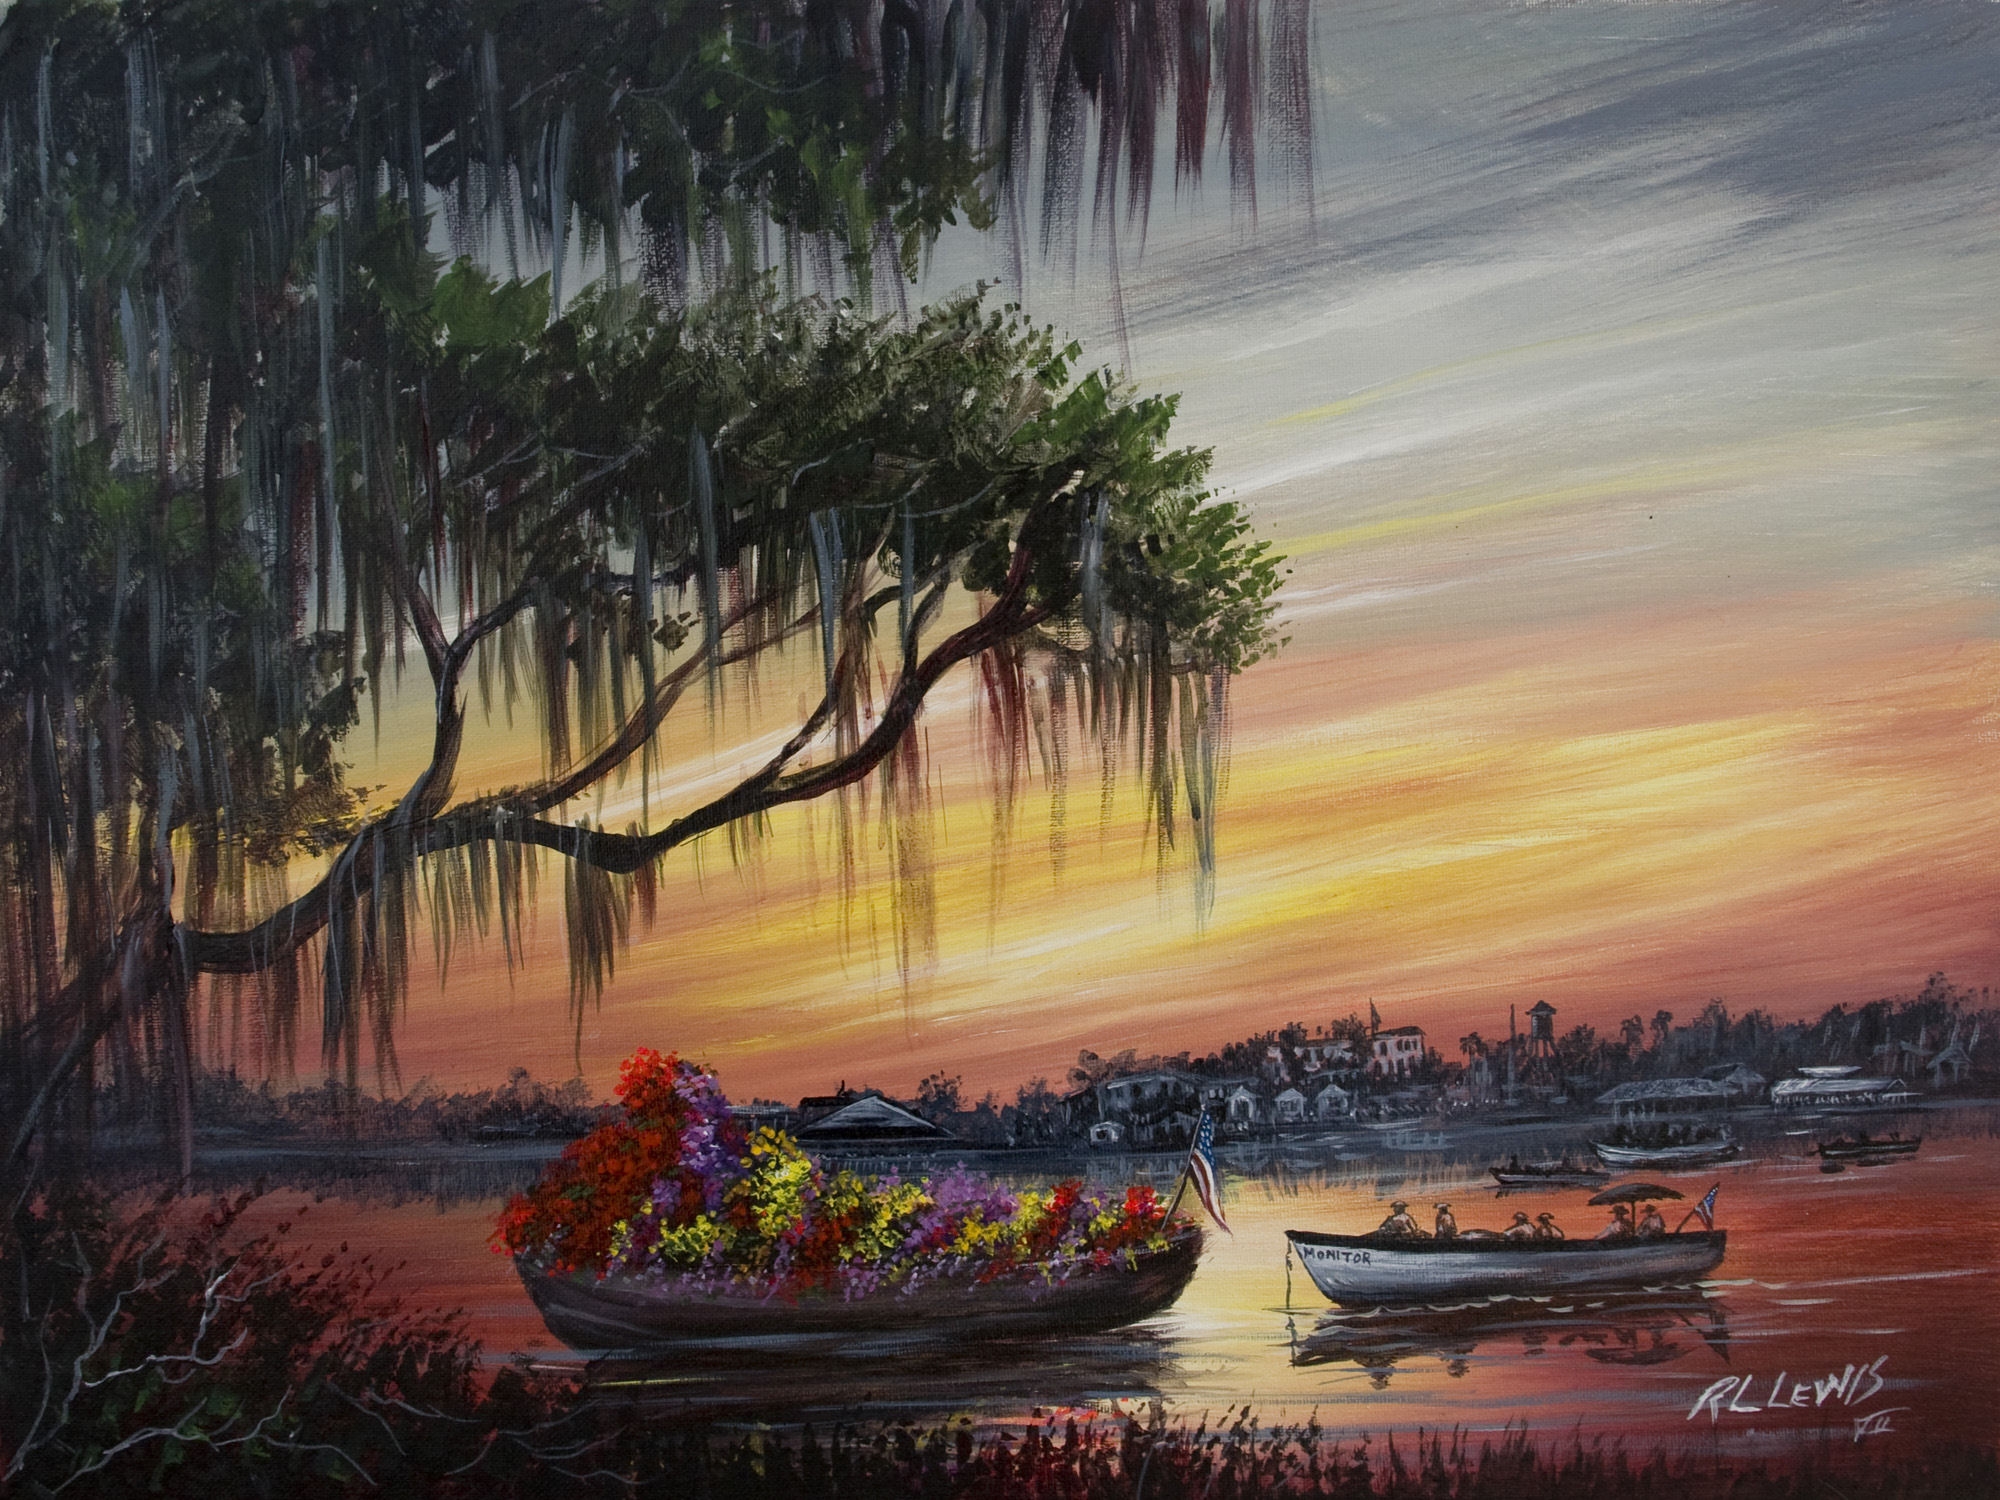 "Paintings of Nostalgic Florida" by RL Lewis and Curtis